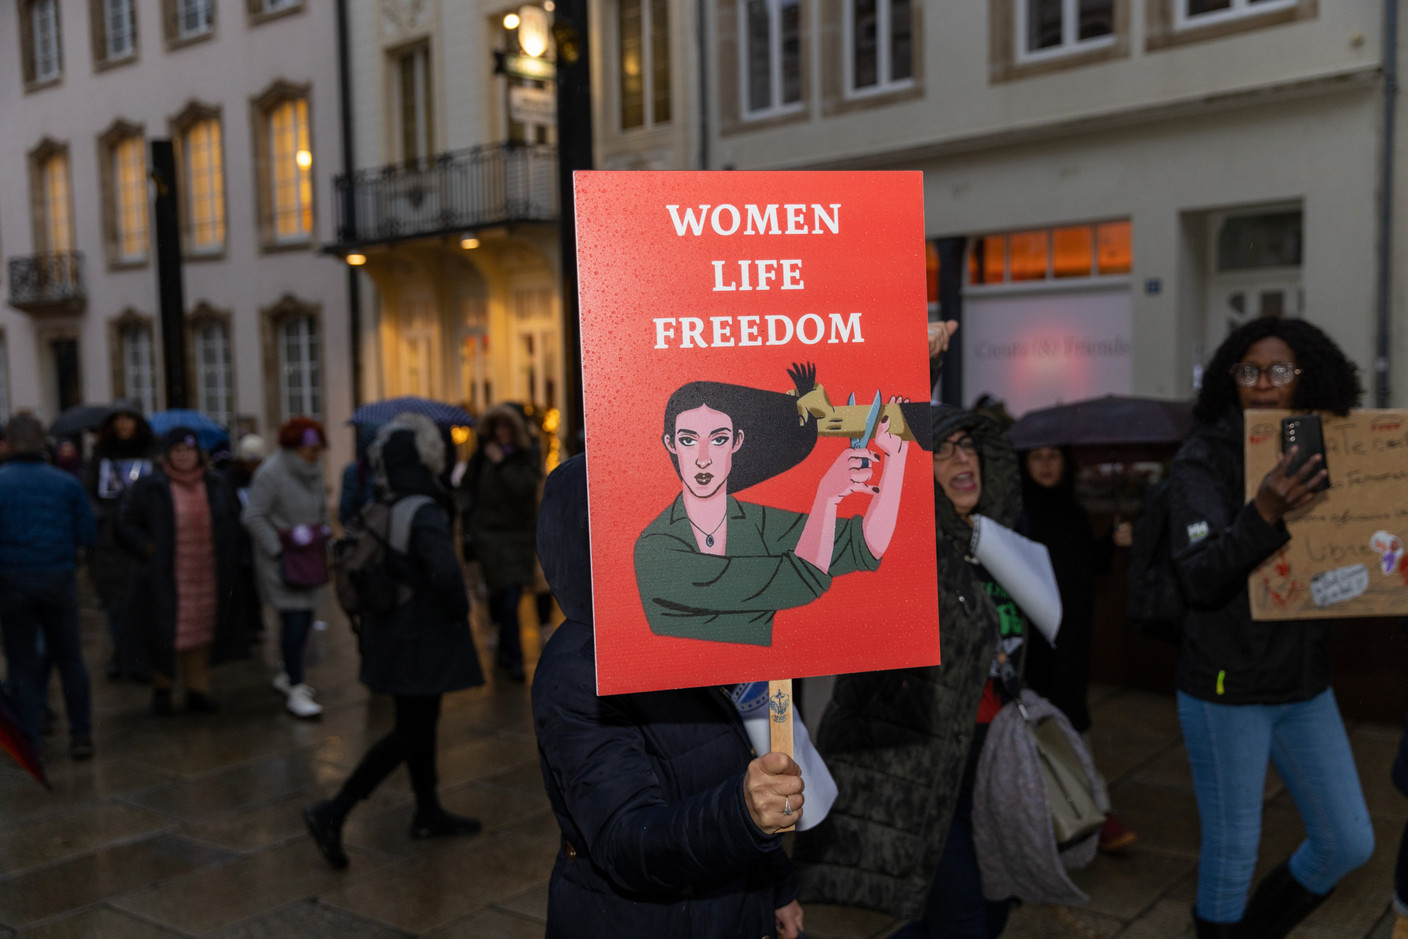 People were seen holding signs in support of women in Iran Photo: Romain Gamba/Maison Moderne